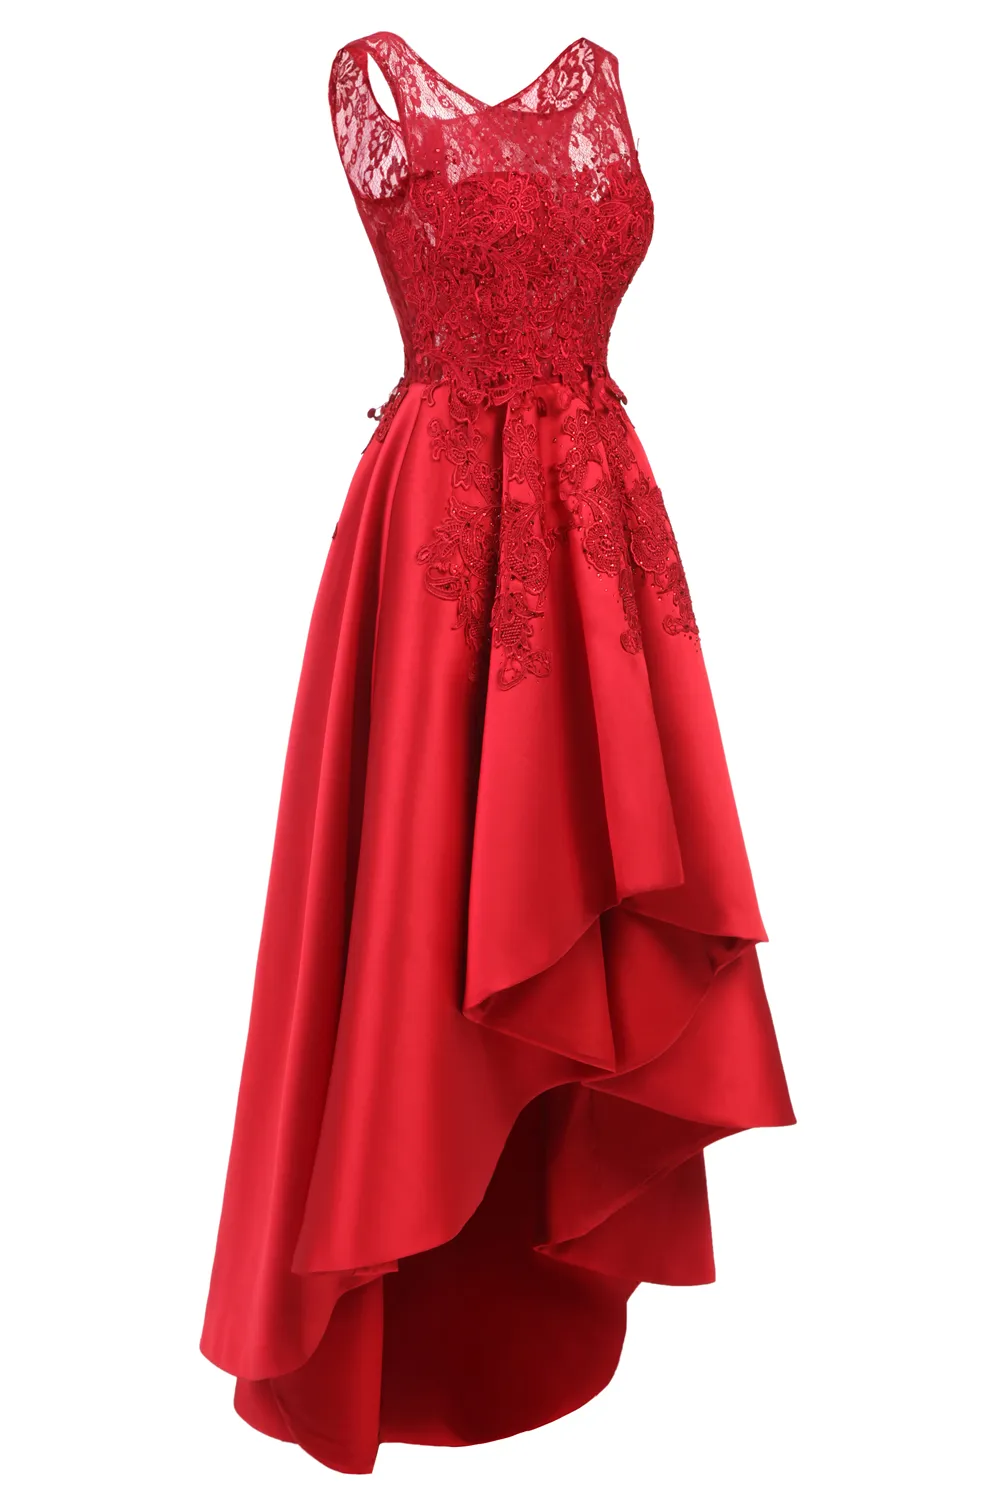 High Low Prom Dresses 2017 Red Lace Formal Cocktail Party Dess Cheap Real Po Short Front Long Back Evening Gowns5159593